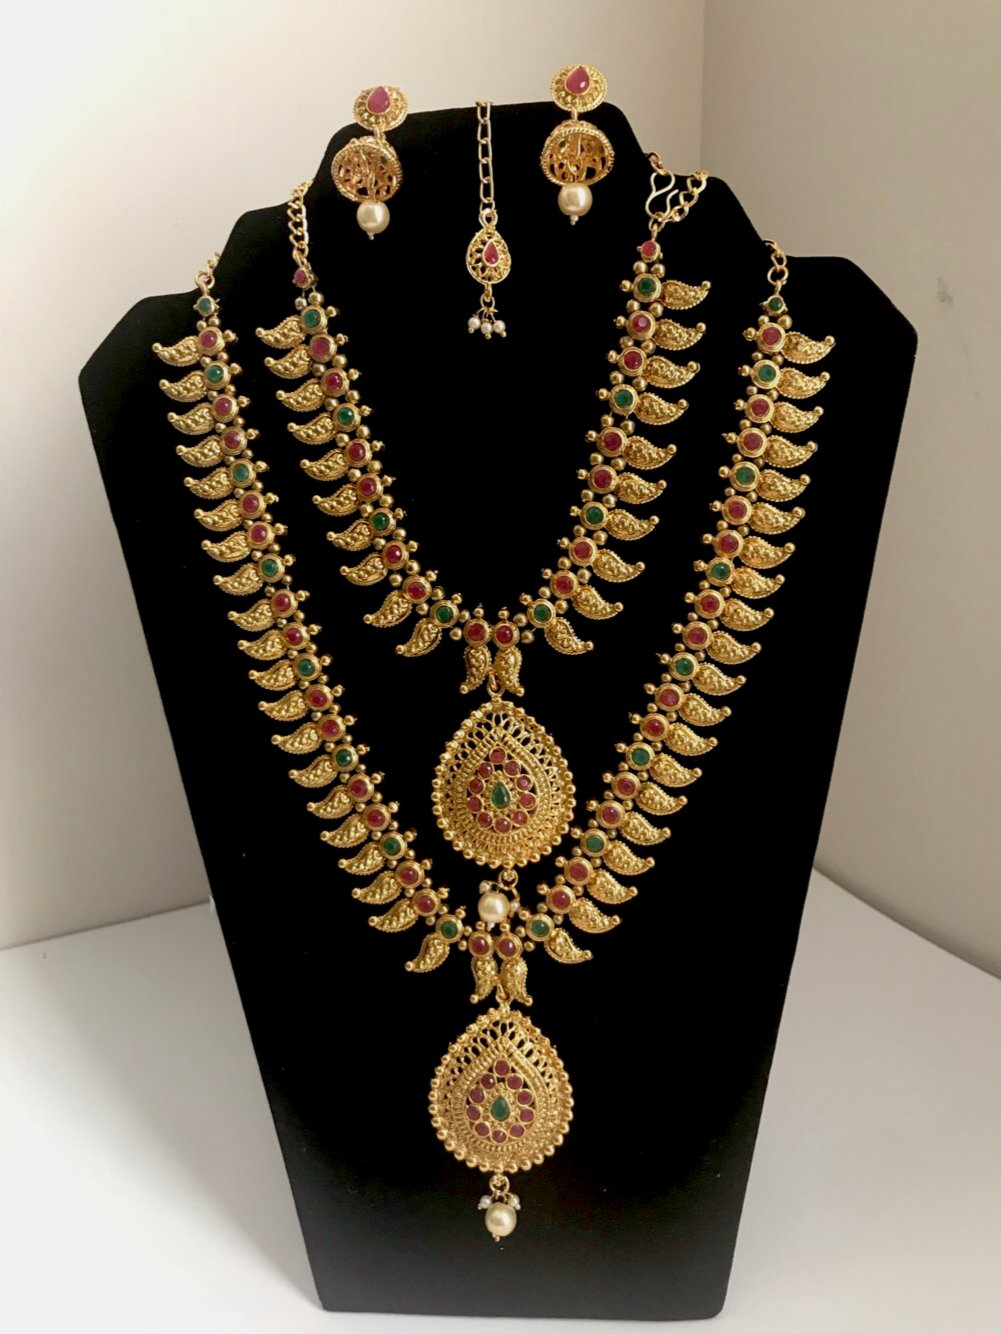 Necklace combo and earrings set Indian jewelry 4 pieces with teeka